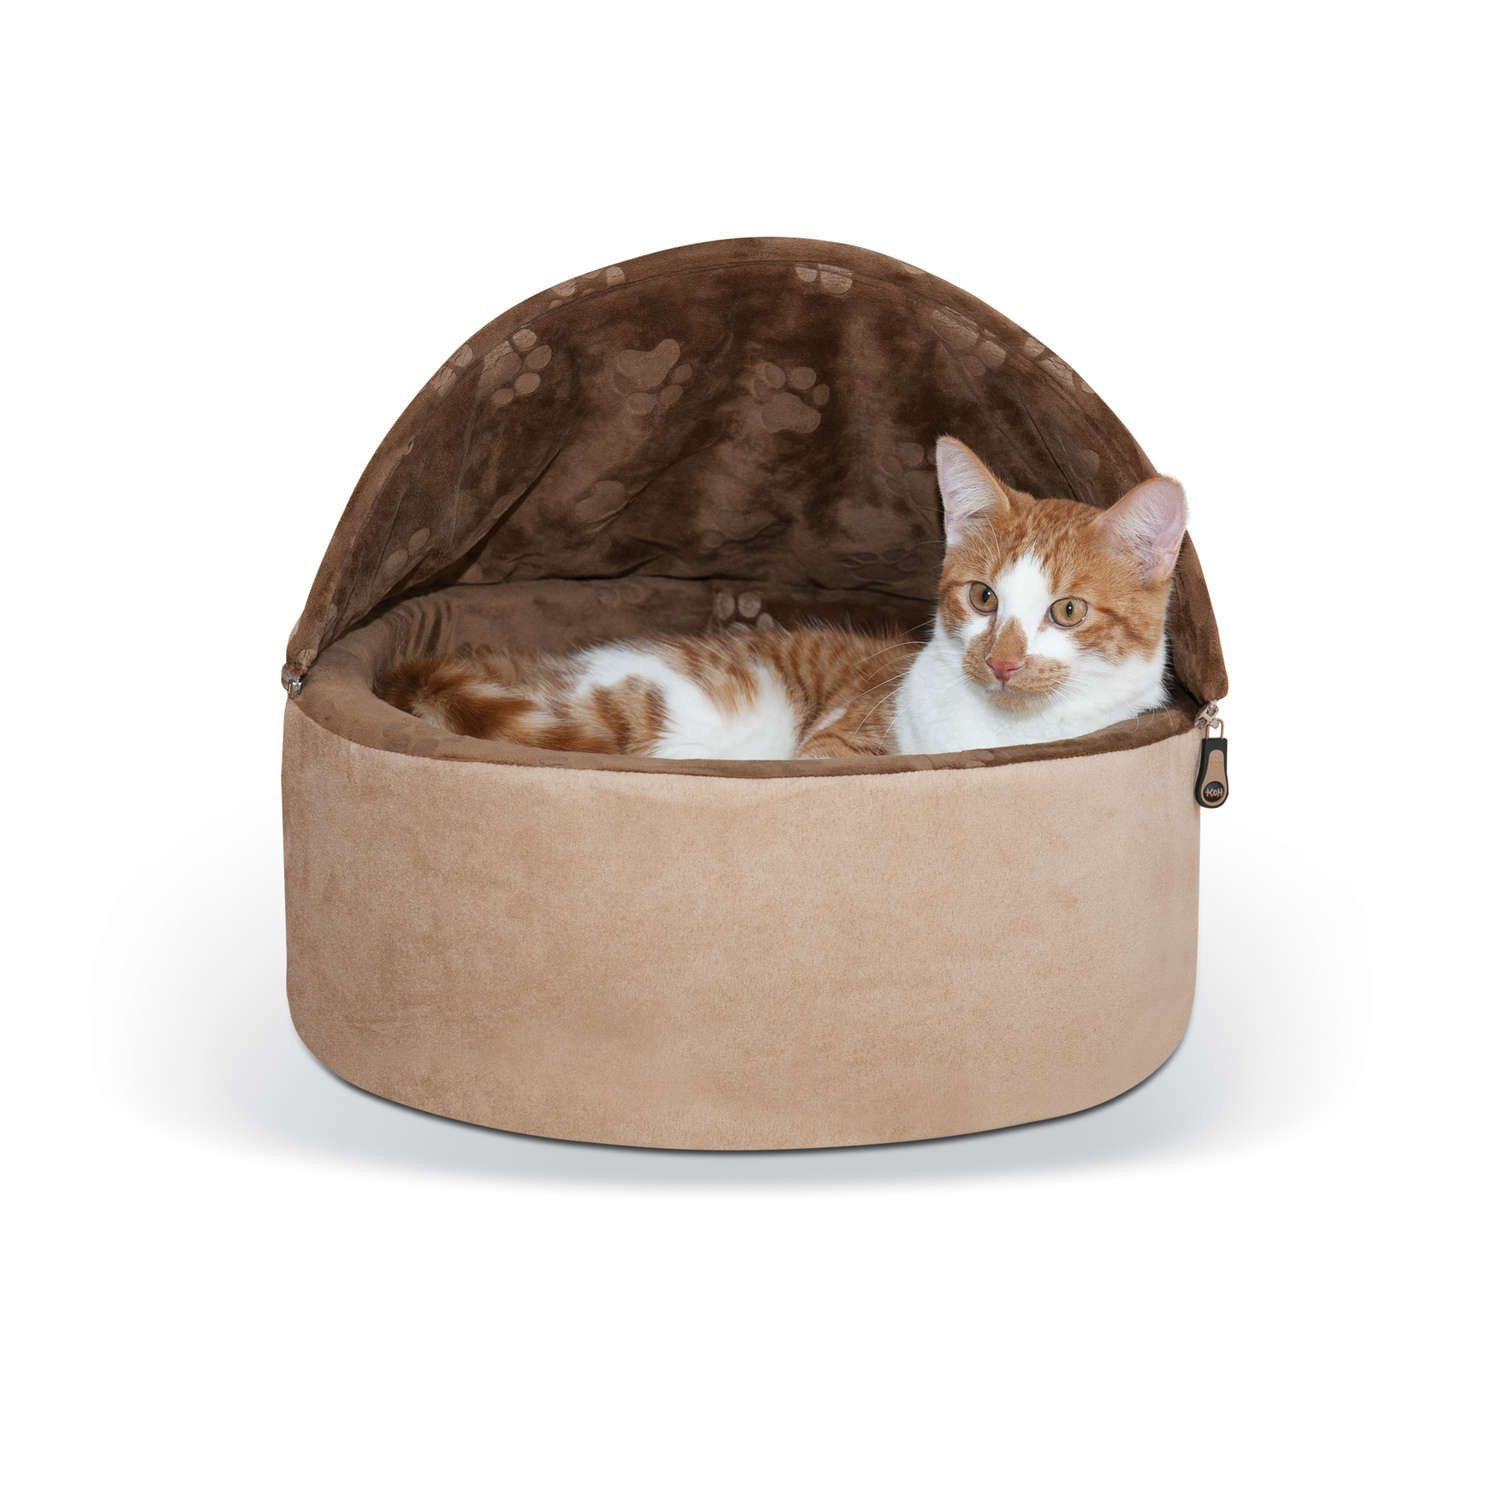 DIY Hooded Dog Bed
 K&H Pet Products KH2995 Self Warming Kitty Bed Hooded